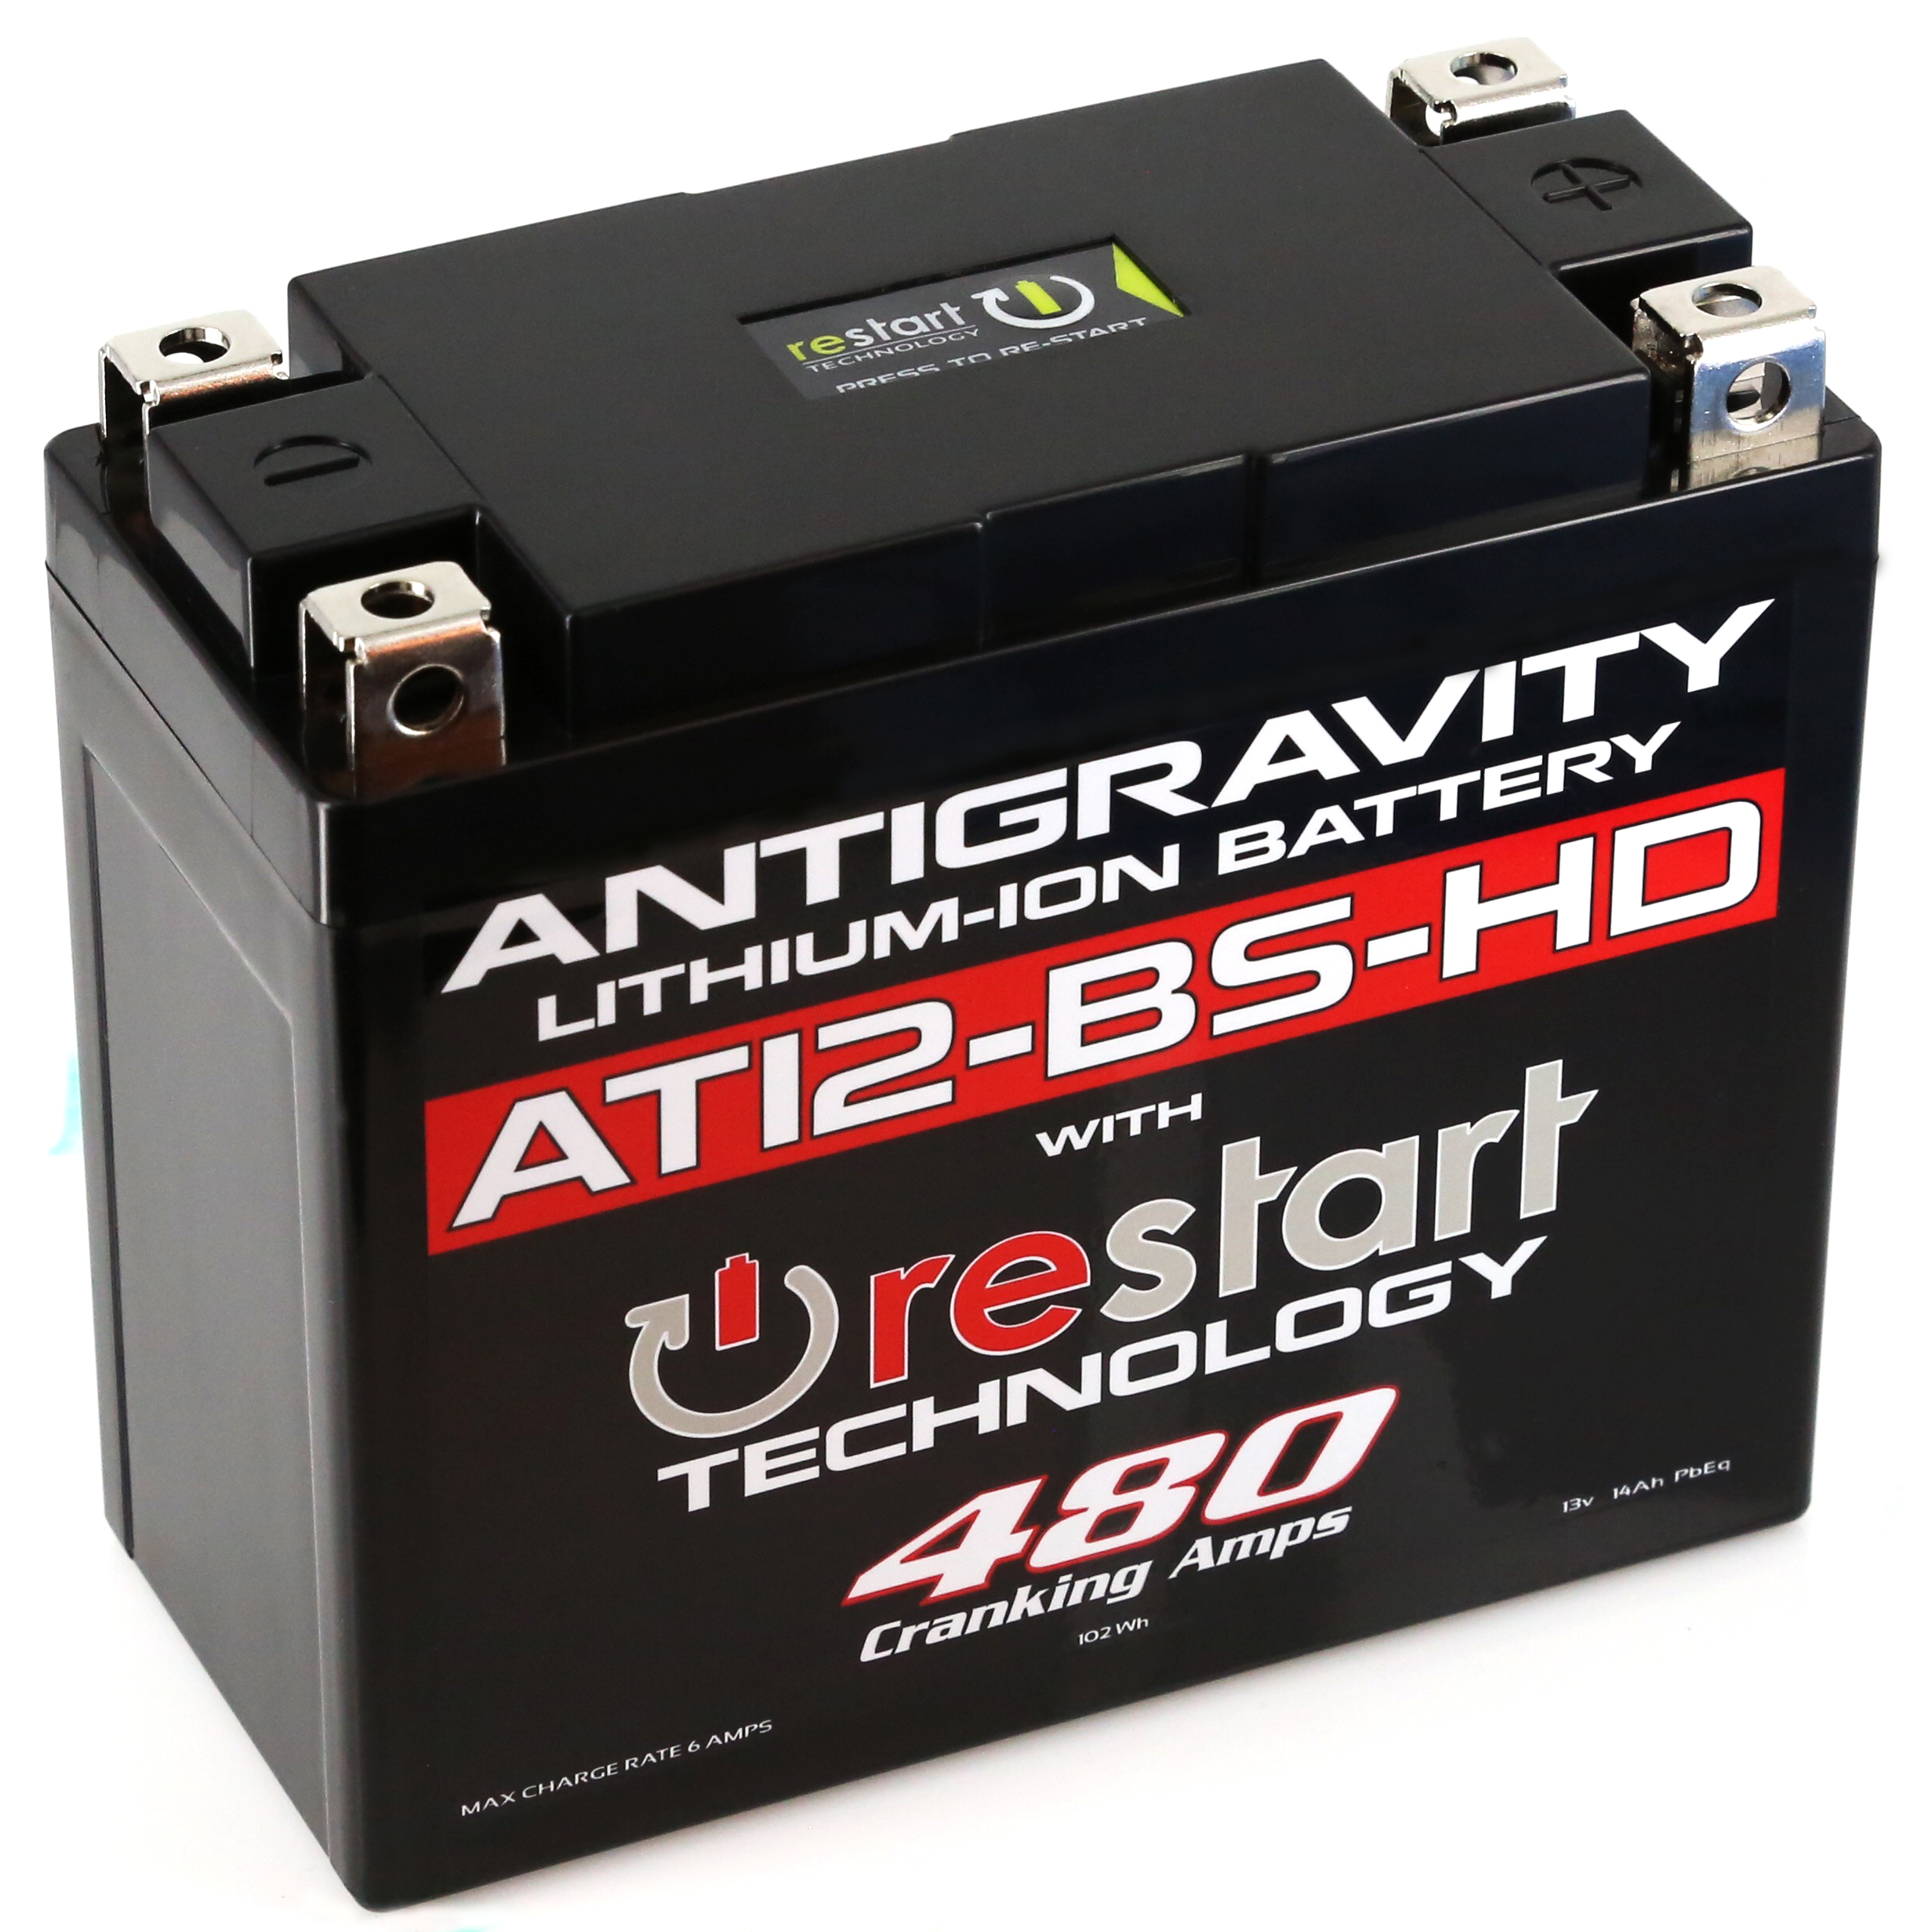 Antigravity - Lithium Battery At12bs-hd-rs 480 Ca - AG-AT12BS-HD-RS